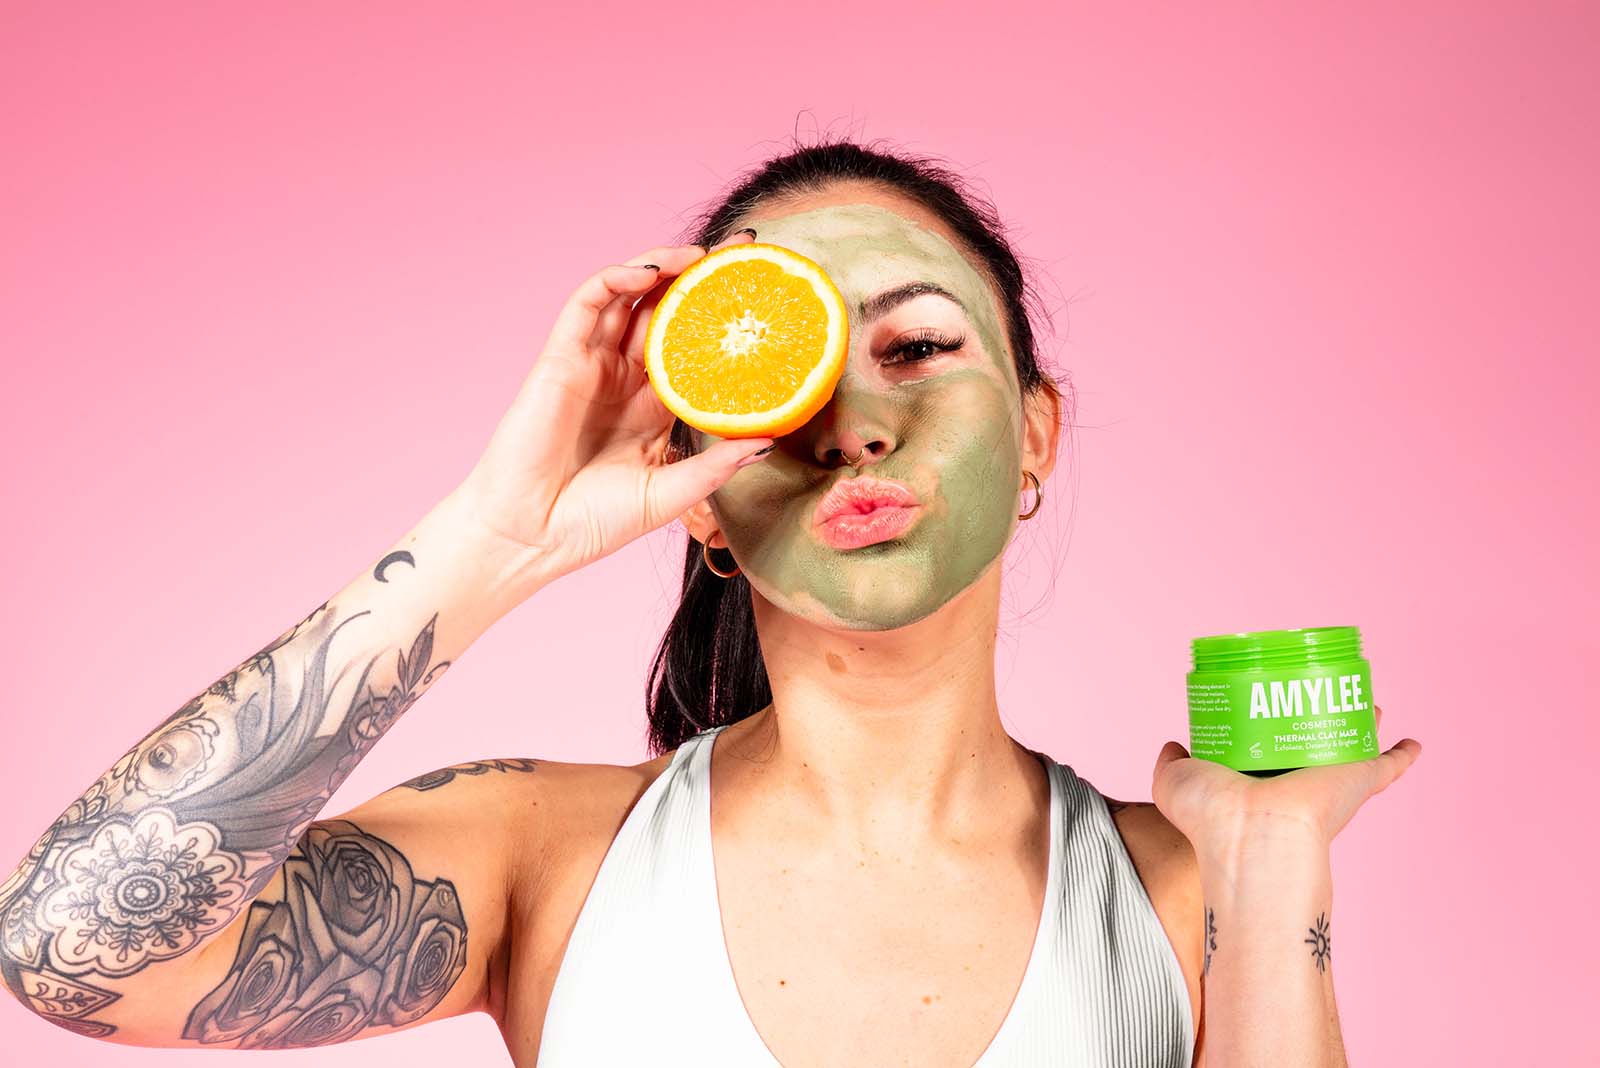 Amy Lee Cosmetics: Colourful Product and Lifestyle Photos for a Clay Mask Brand